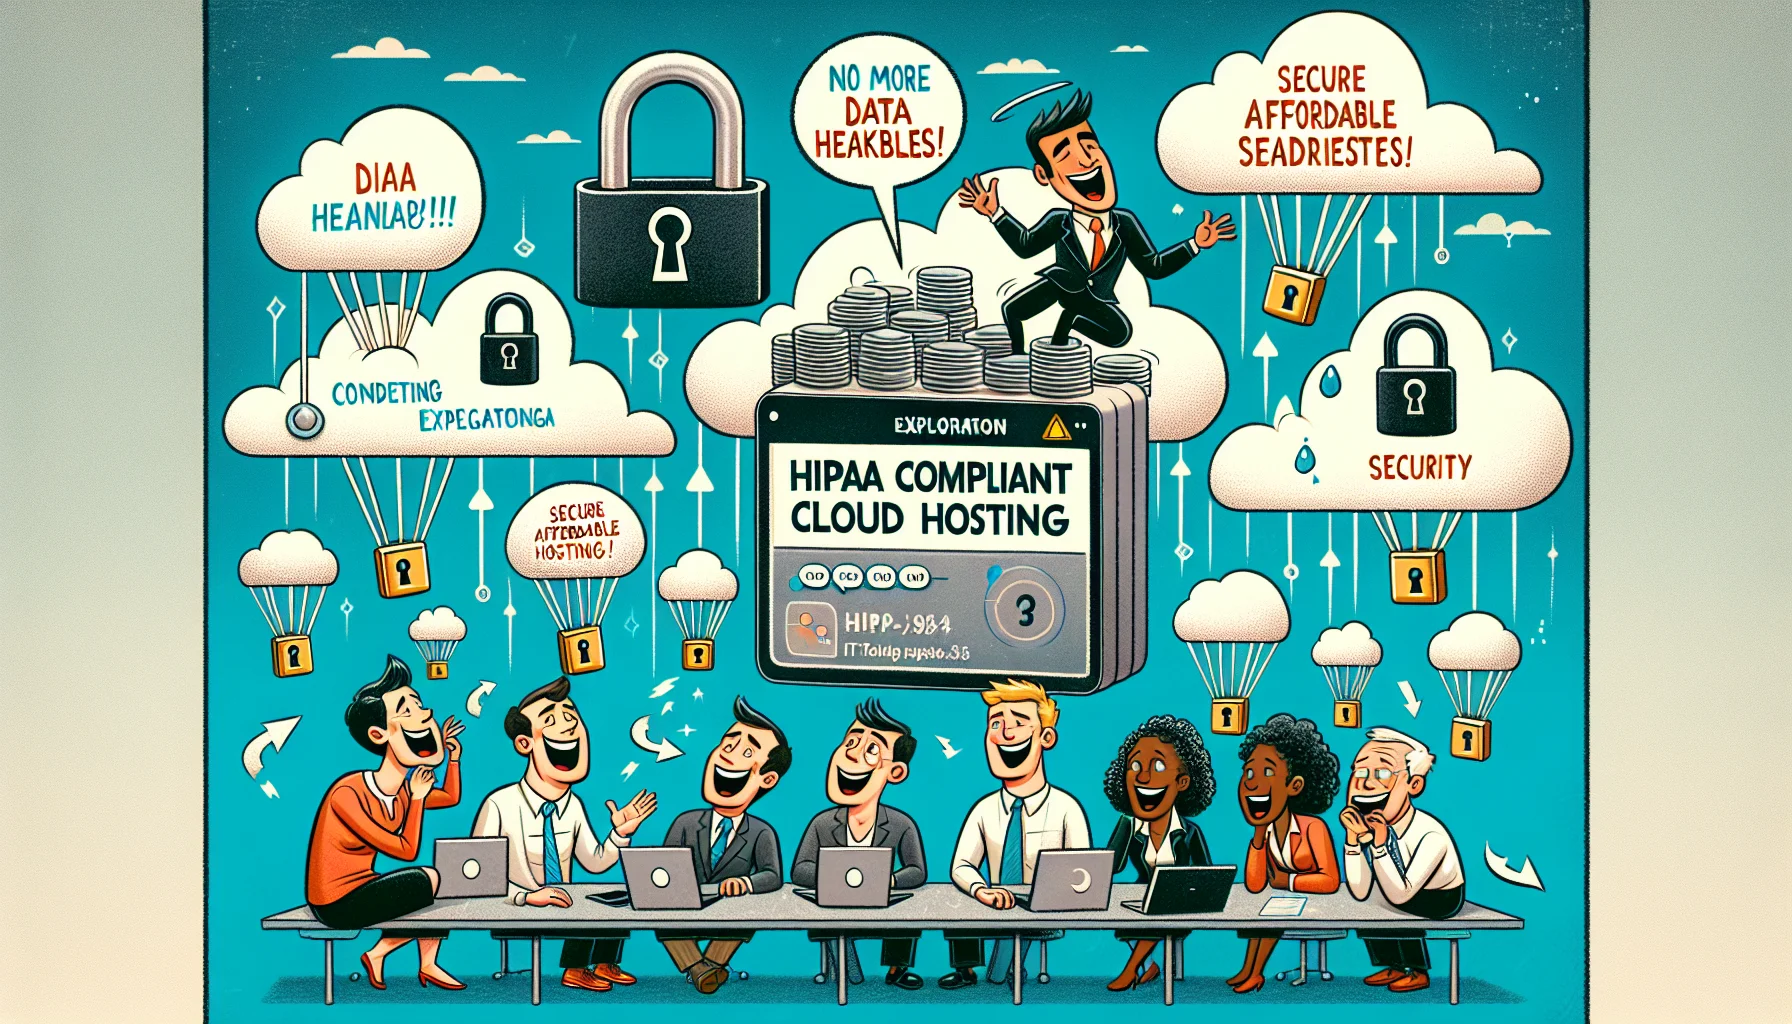 Create a humorous and enticing image displaying HIPAA compliant cloud hosting. The scene should be an imaginative representation of the internet, where nimble clouds with locks signifying security are floating. Exploration data packets designed as mini parachutes are dropping into these clouds. There's a line-up of diverse, cartoonish individuals representing decision-makers from a variety of businesses. A Caucasian male IT manager is laughing out loudly at a prompt on his device screen reading 'No more data headaches!'. Meanwhile, a black female CEO is looking intrigued at her device screen flashing 'Secure and affordable hosting!'